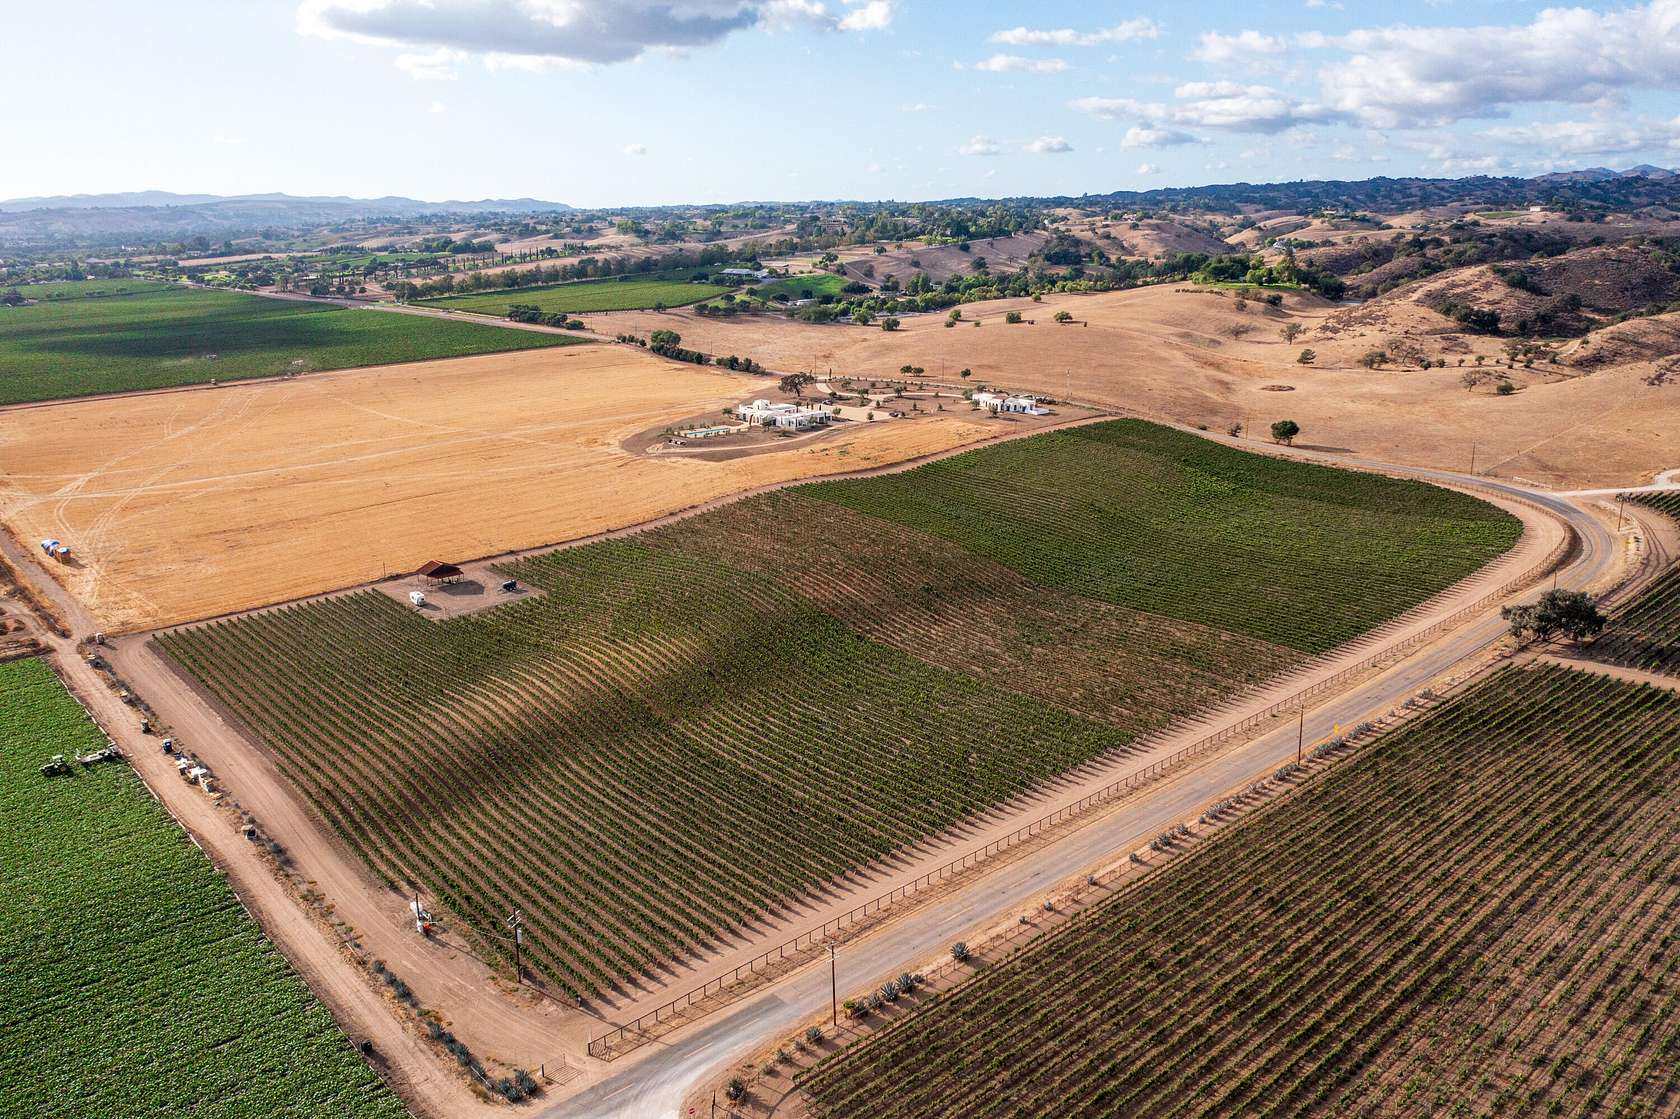 20.2 Acres of Agricultural Land for Sale in Santa Ynez, California